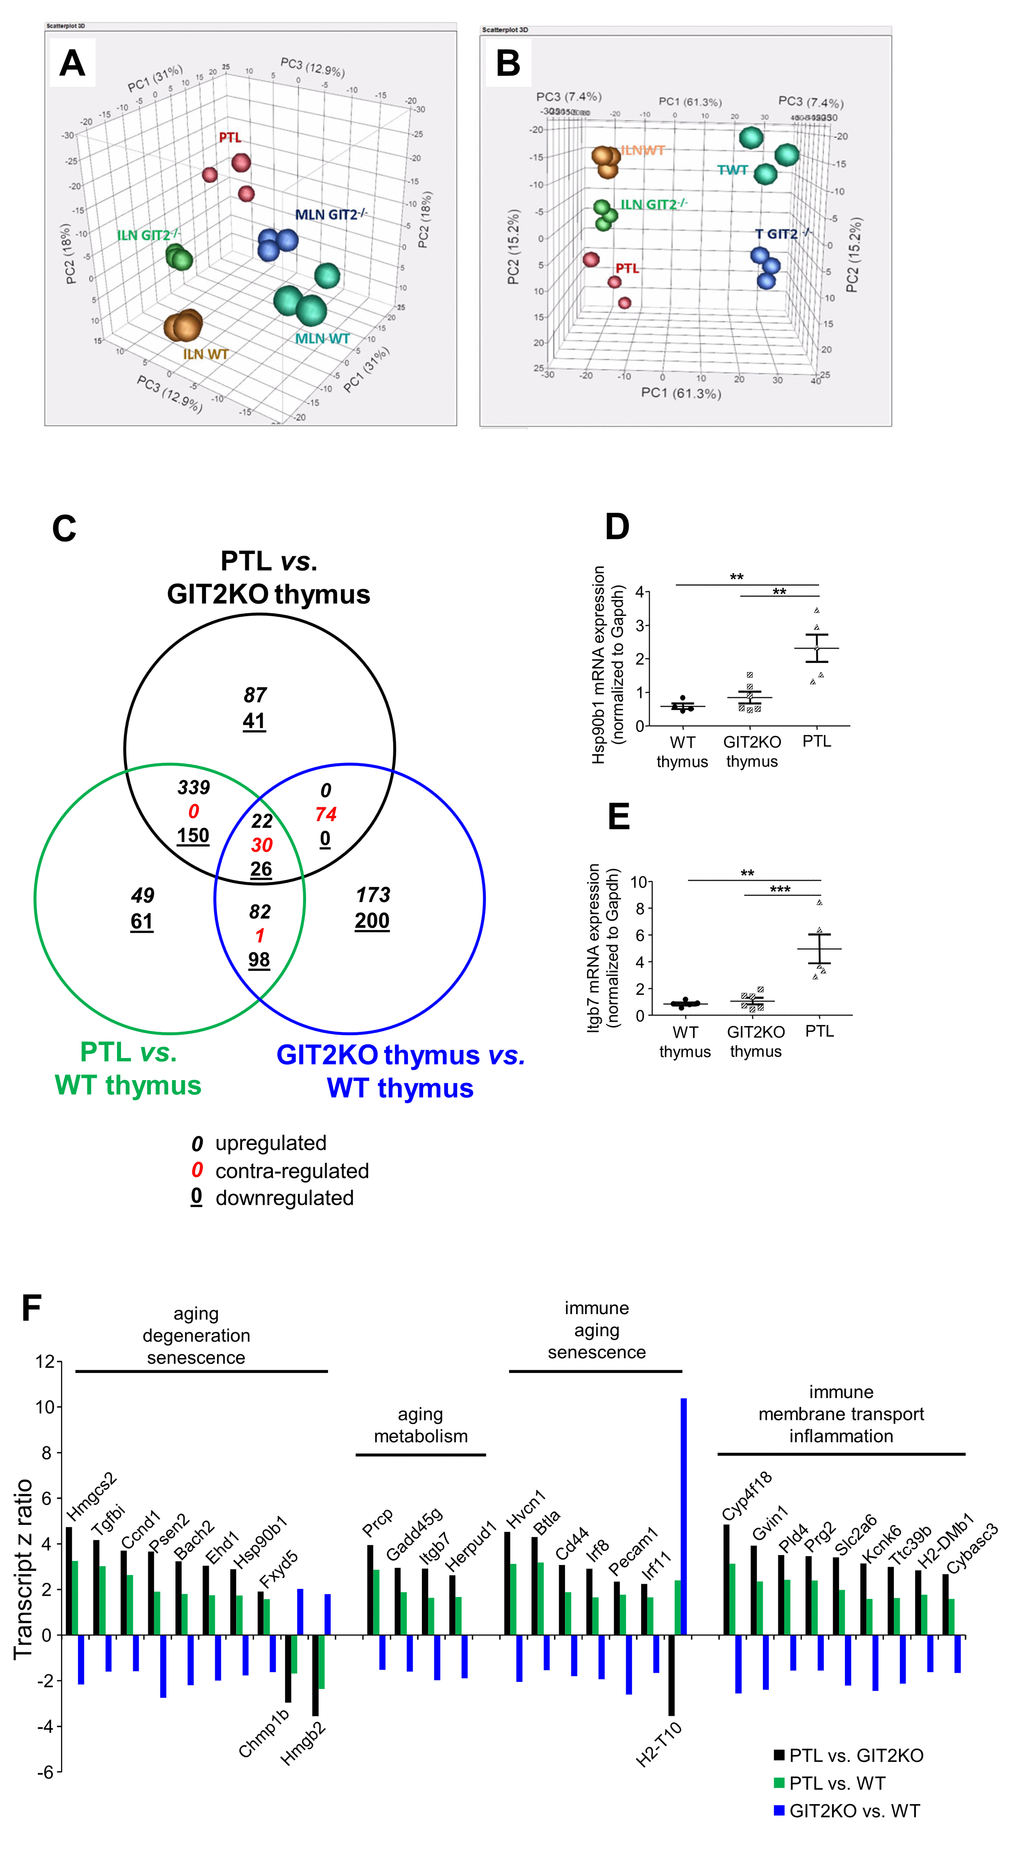 Transcriptomic analysis of GIT2KO parathymic lobes. Principal component analyses were performed upon transcriptomic data from thymus (WT thymus = TWT; GIT2KO thymus = T GIT2-/-), WT/GIT2KO ILN and MLN, as well as PTLs from GIT2KO mice. PTL transcriptome data separates with PCA from ILN and MLN from both WT and GIT2KO mice (A). PTLs share component 2 with GIT2KO thymi and component 1 with WT and GIT2KO ILN (B). Venn diagram analysis of significantly-regulated transcripts generated by the following tissue transcriptome comparisons: GIT2KO PTLs vs. GIT2KO thymus (black circle); GIT2KO PTL vs. WT thymus (green circle); GIT2KO thymus vs. WT thymus (blue circle). For the Venn diagram numbers in italics represent upregulated transcripts, underlined numbers represent downregulated transcripts, red numbers represent transcripts possessing diverse expression polarities (C). RT-PCR validations of selected PTL transcripts Hsp90β1 (D) and Itgb7 (E: **pF).